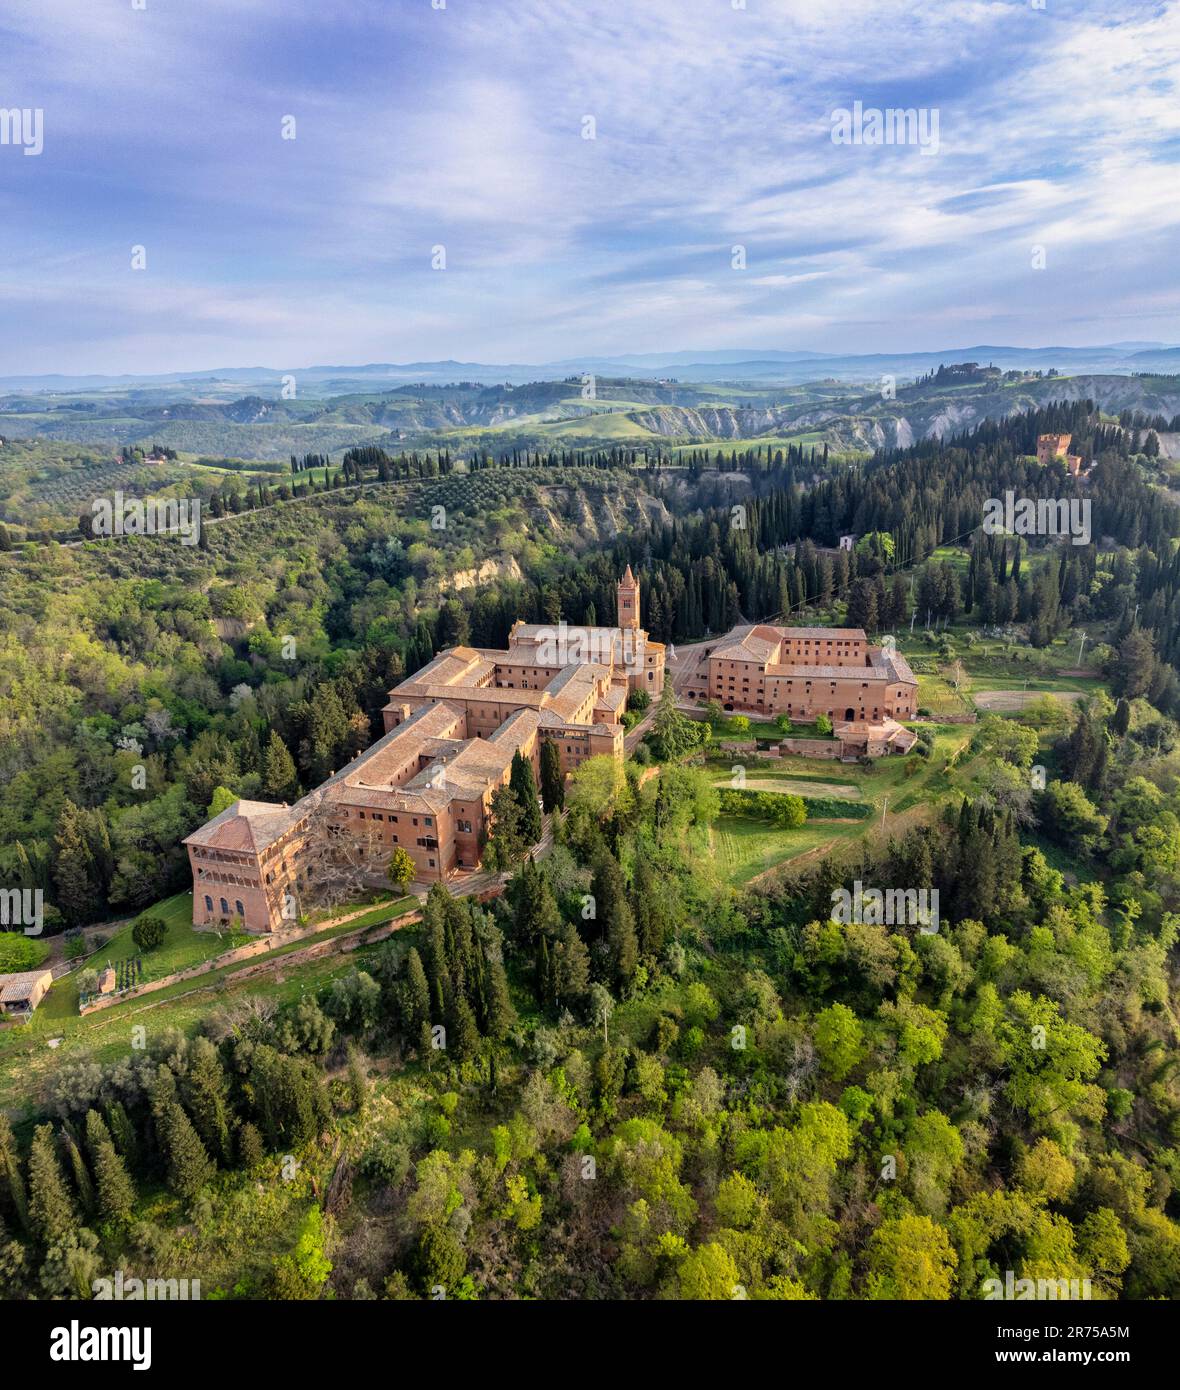 Aerial view of the abbey of Monte Oliveto Maggiore, Asciano, province of Siena, Tuscany, Italy Stock Photo